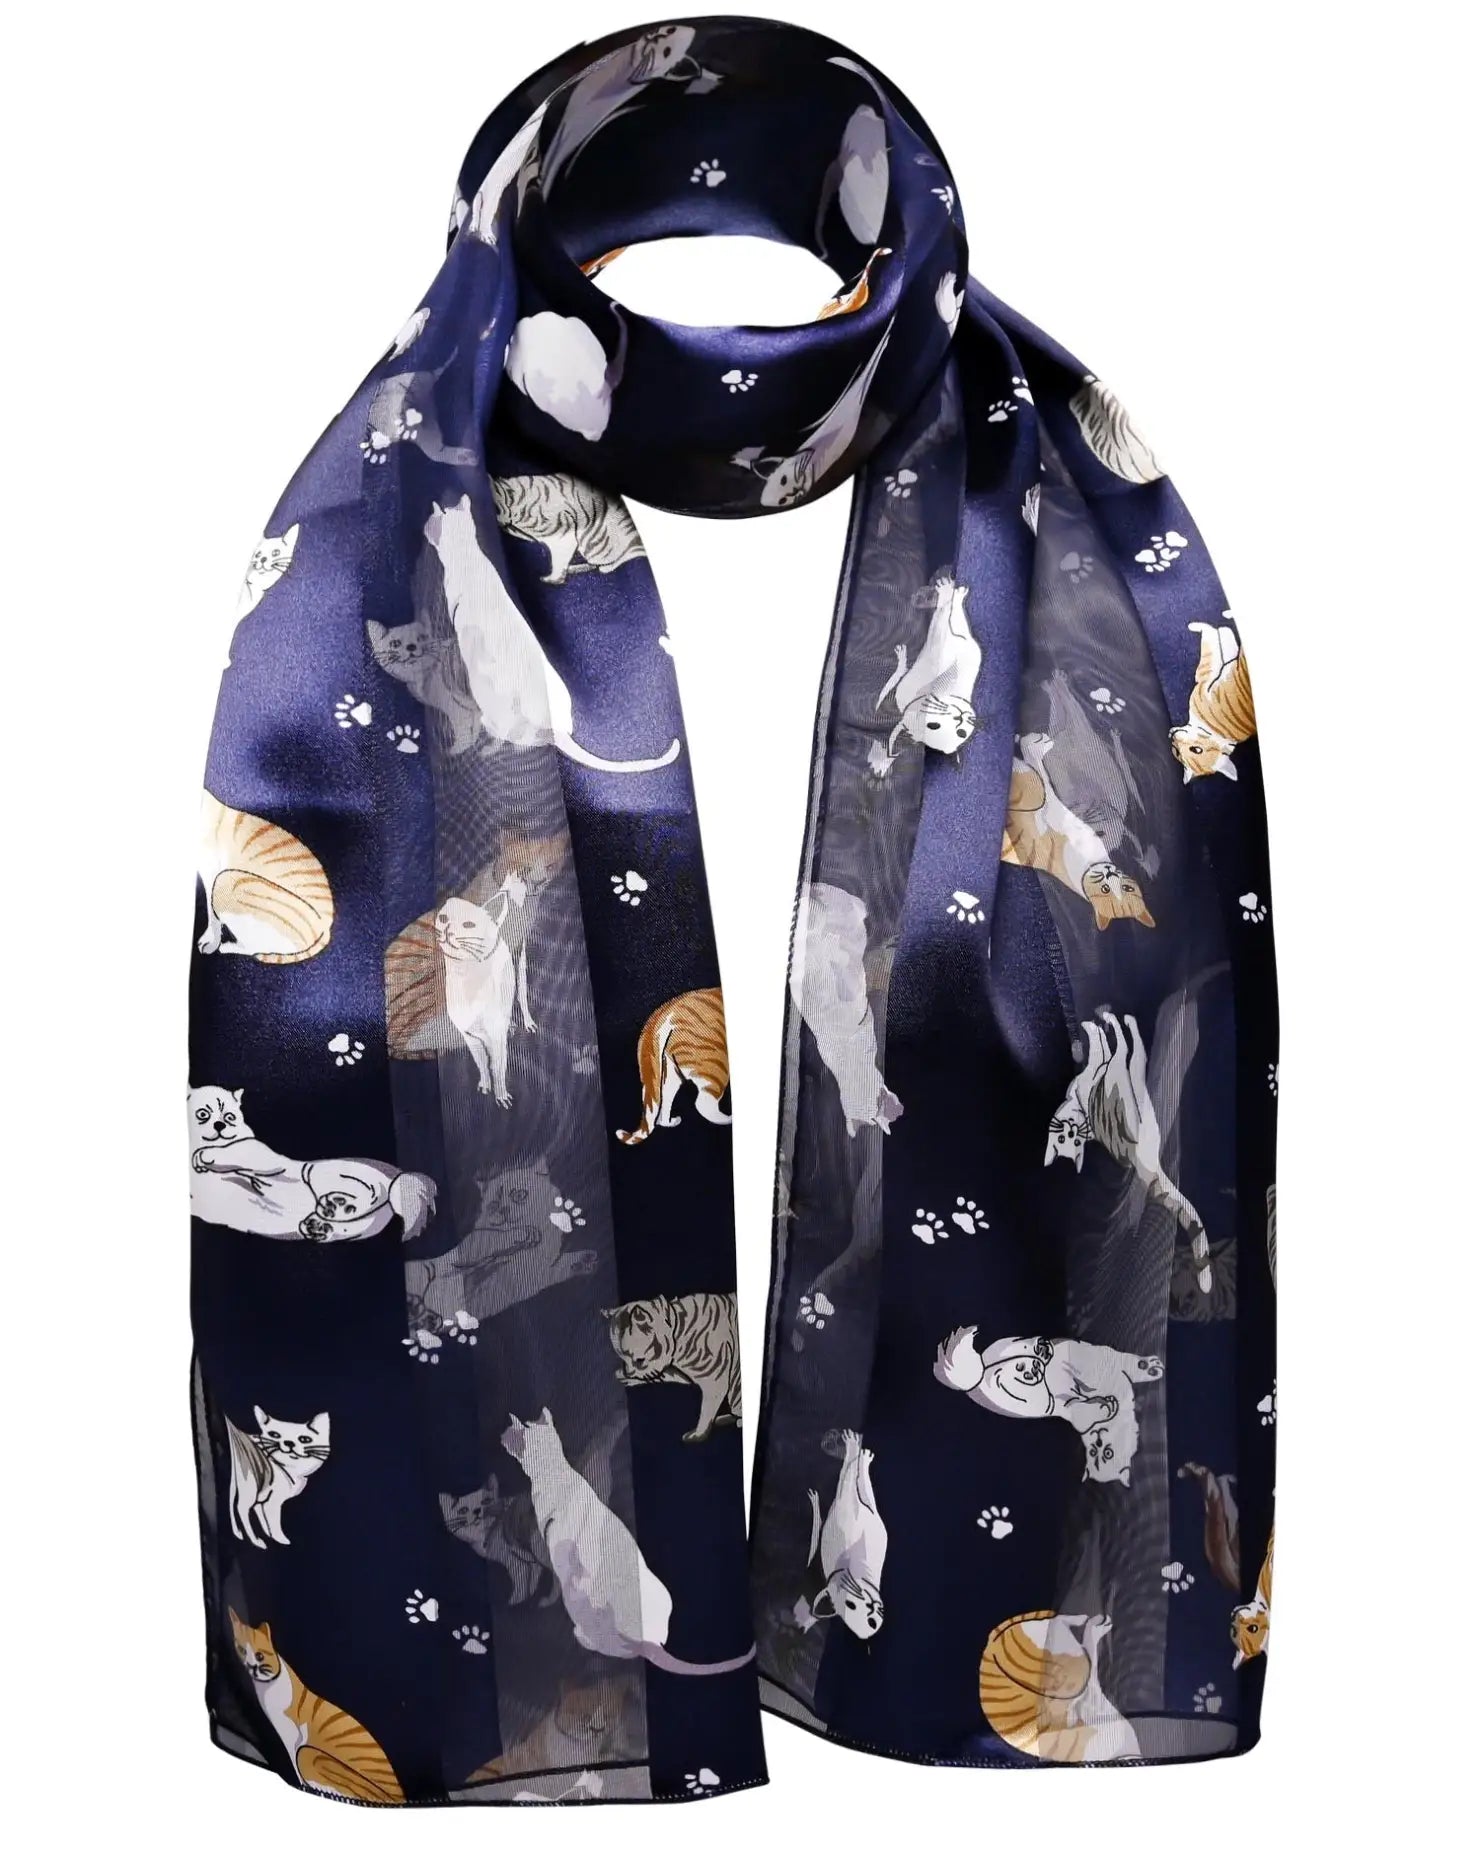 Cat print novelty scarf with navy cats design